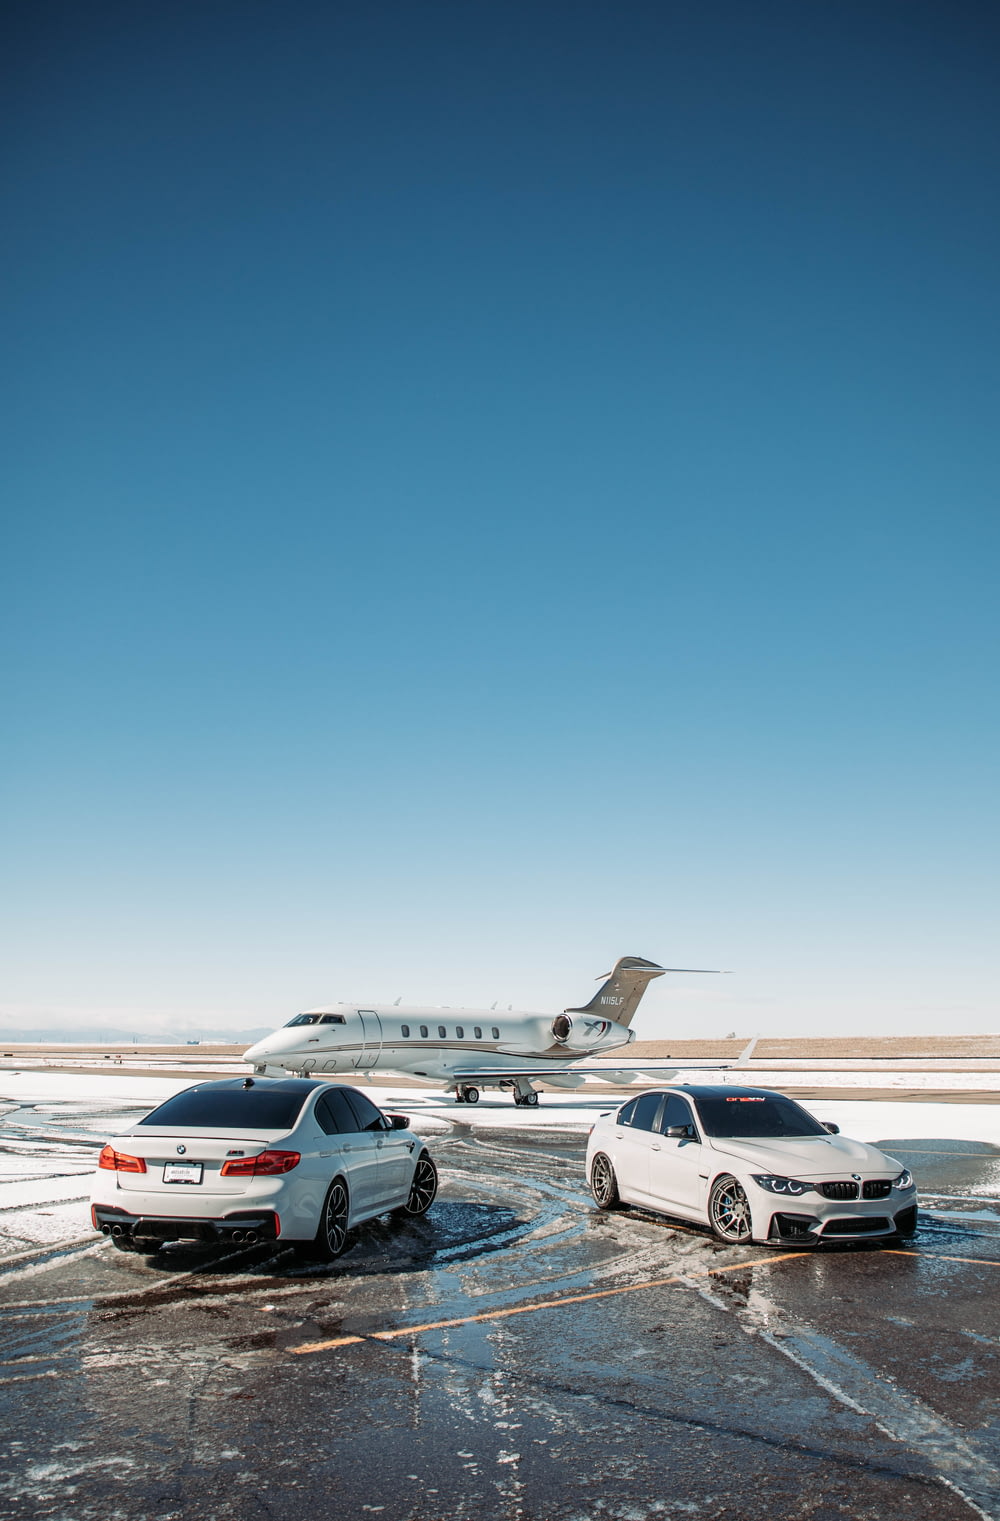 two cars parked in a parking lot next to an airplane